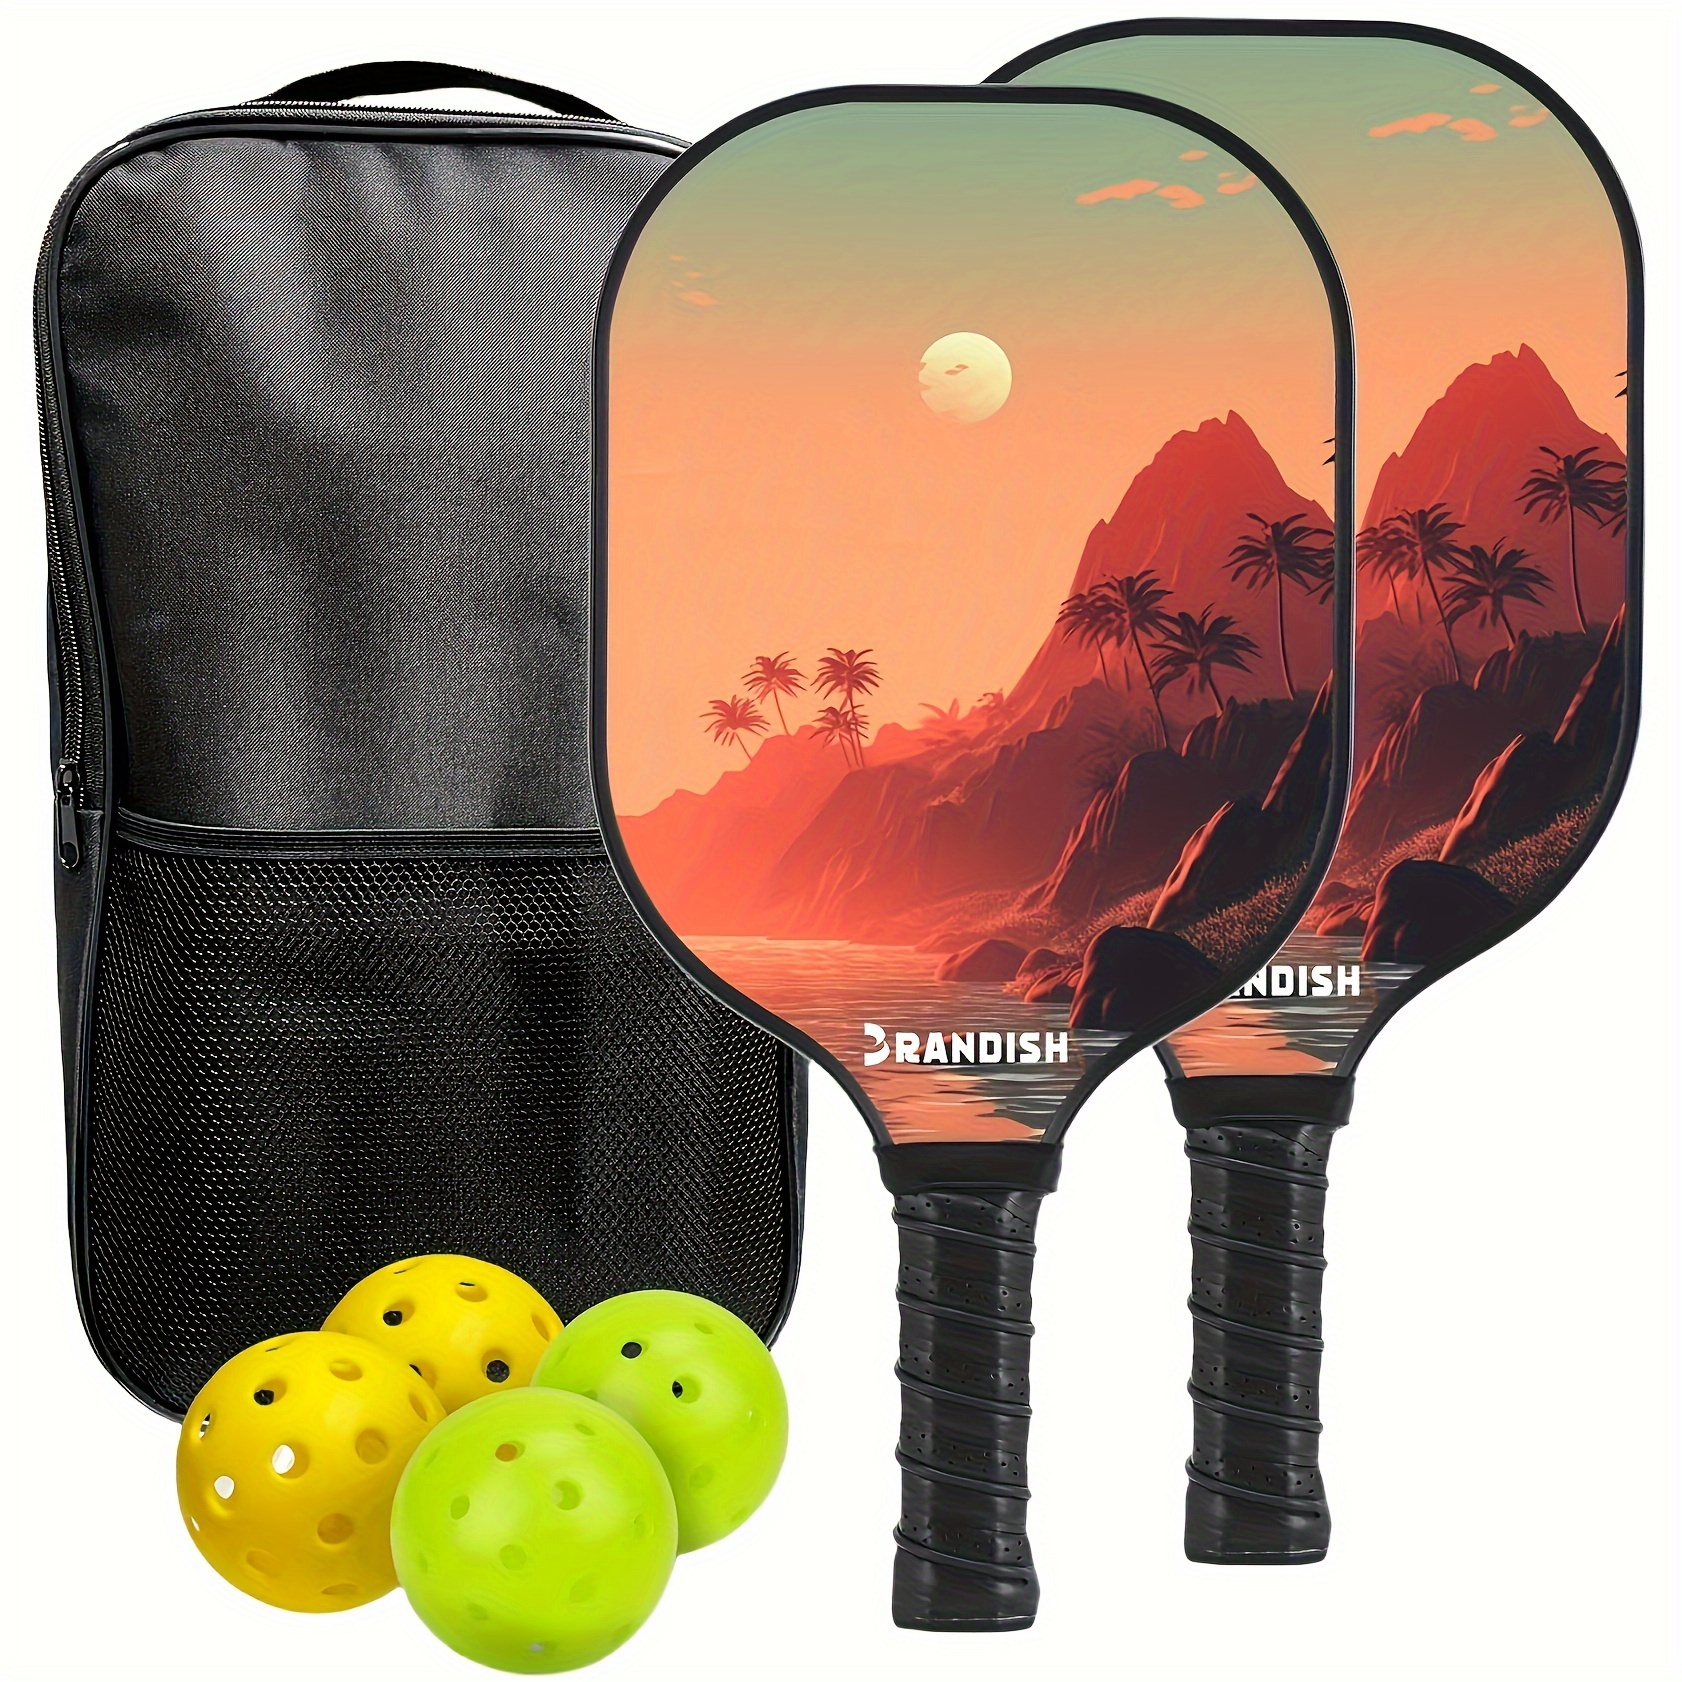 

Pickleball Paddles Set Of 2, Pickleball Paddles Set With 4 Pickleball Balls And Pickleball Carry Bag, Fiberglass Pickle Ball Rackets 2 Pack Gifts For Beginners&pros